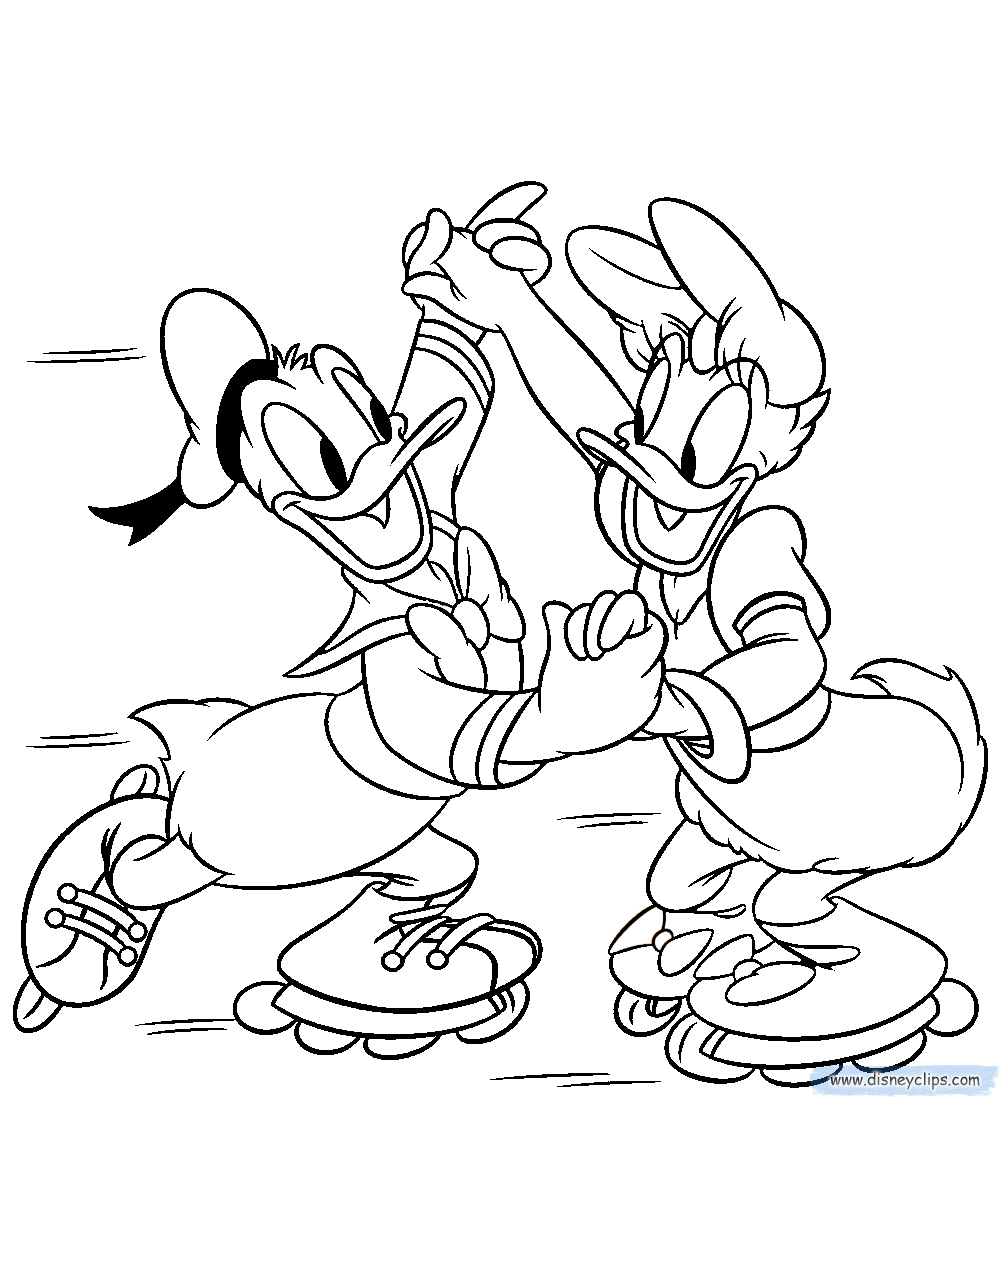 donald and daisy coloring pages donald and daisy duck coloring pages 2 disney coloring book pages donald daisy coloring and 